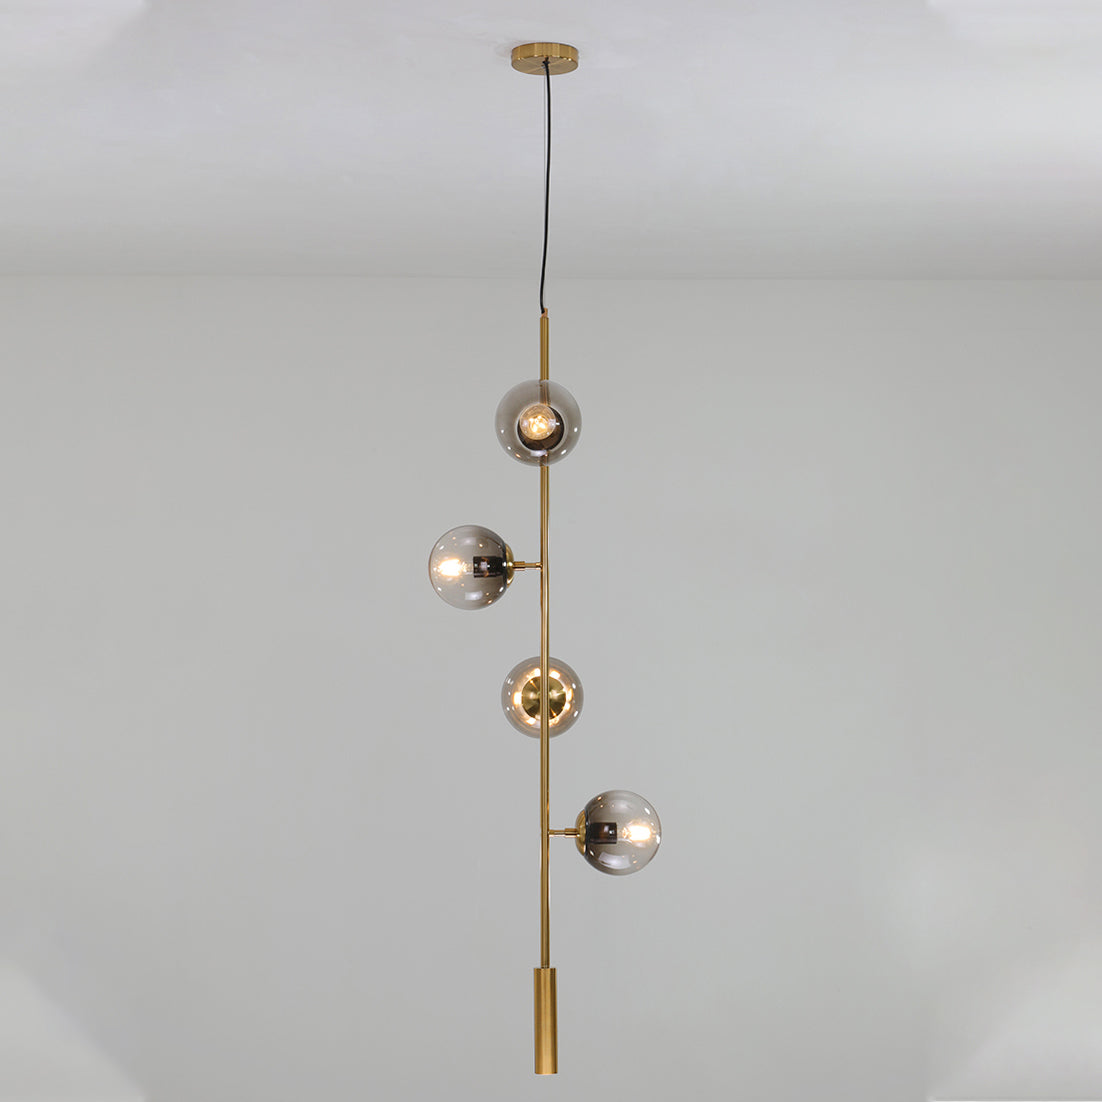 Olive Tree Branch 4 Bulb Staircase Void Brass Pendant Light